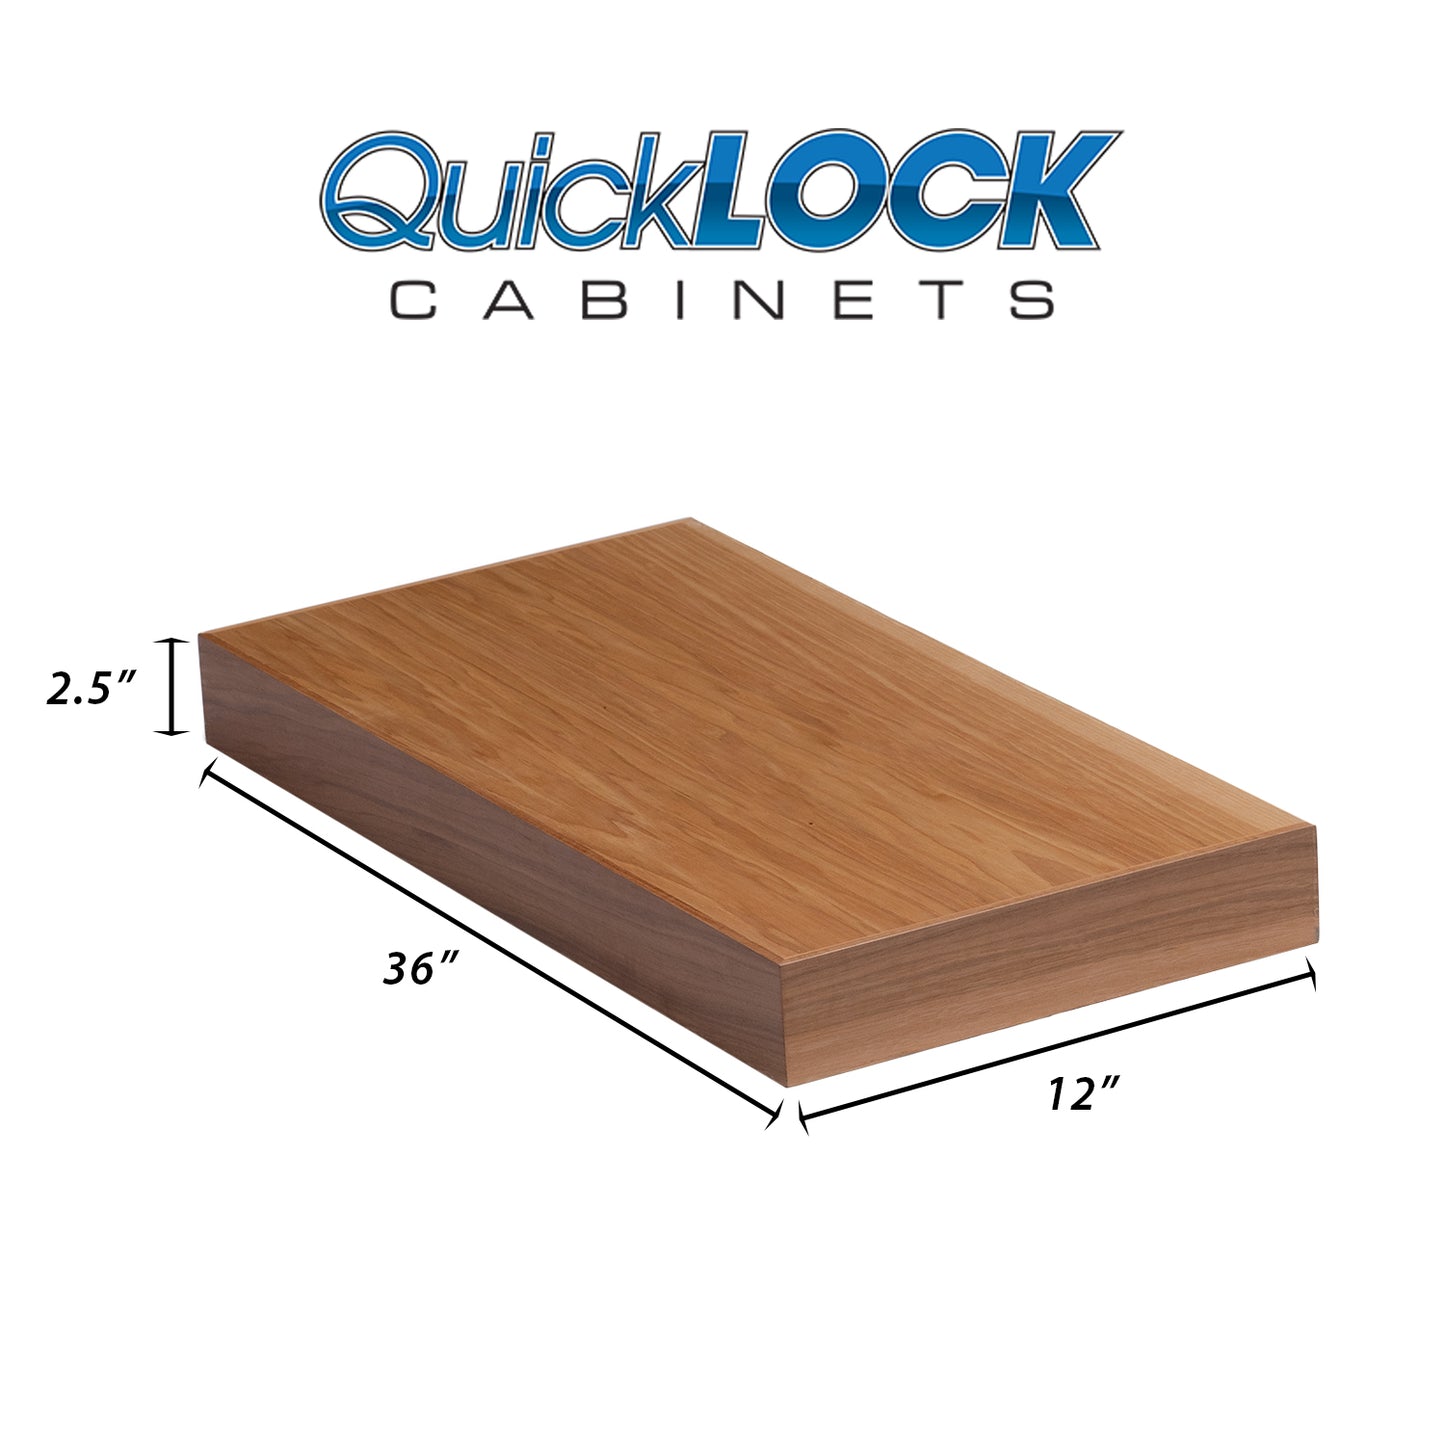 Quicklock Cabinets Floating Shelves | 2.5" Thick | Rustic Hickory, 12" D x 36" W x 2.5" H | American Made | Hardwood Bracket | Complete Shelf Unit